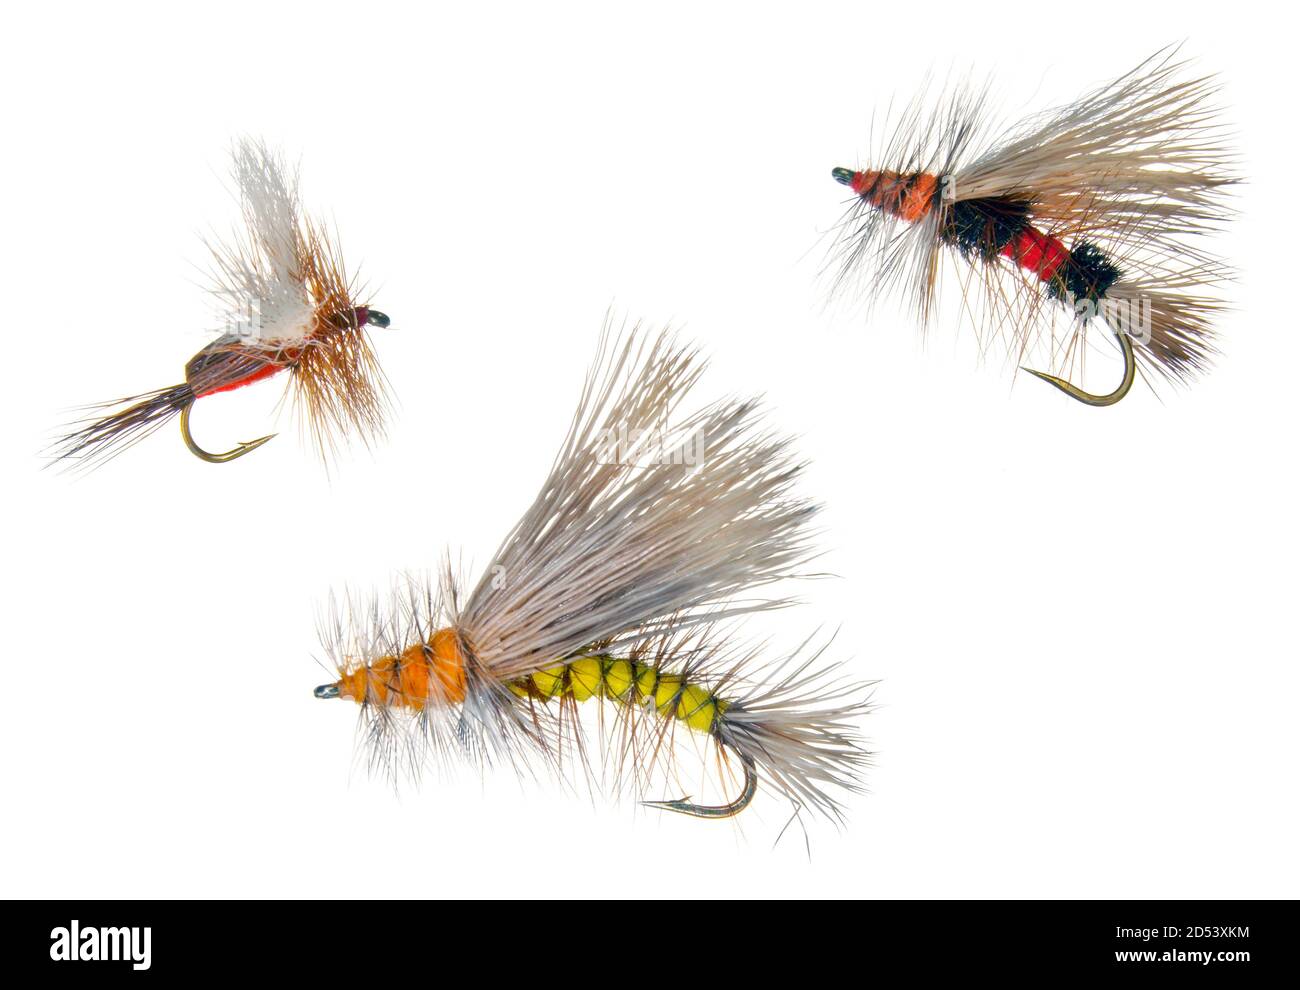 https://c8.alamy.com/comp/2D53XKM/three-red-orange-and-yellow-single-hook-fishing-lures-photographed-on-a-white-background-httpsmuggphotophotosheltercomindex-2D53XKM.jpg